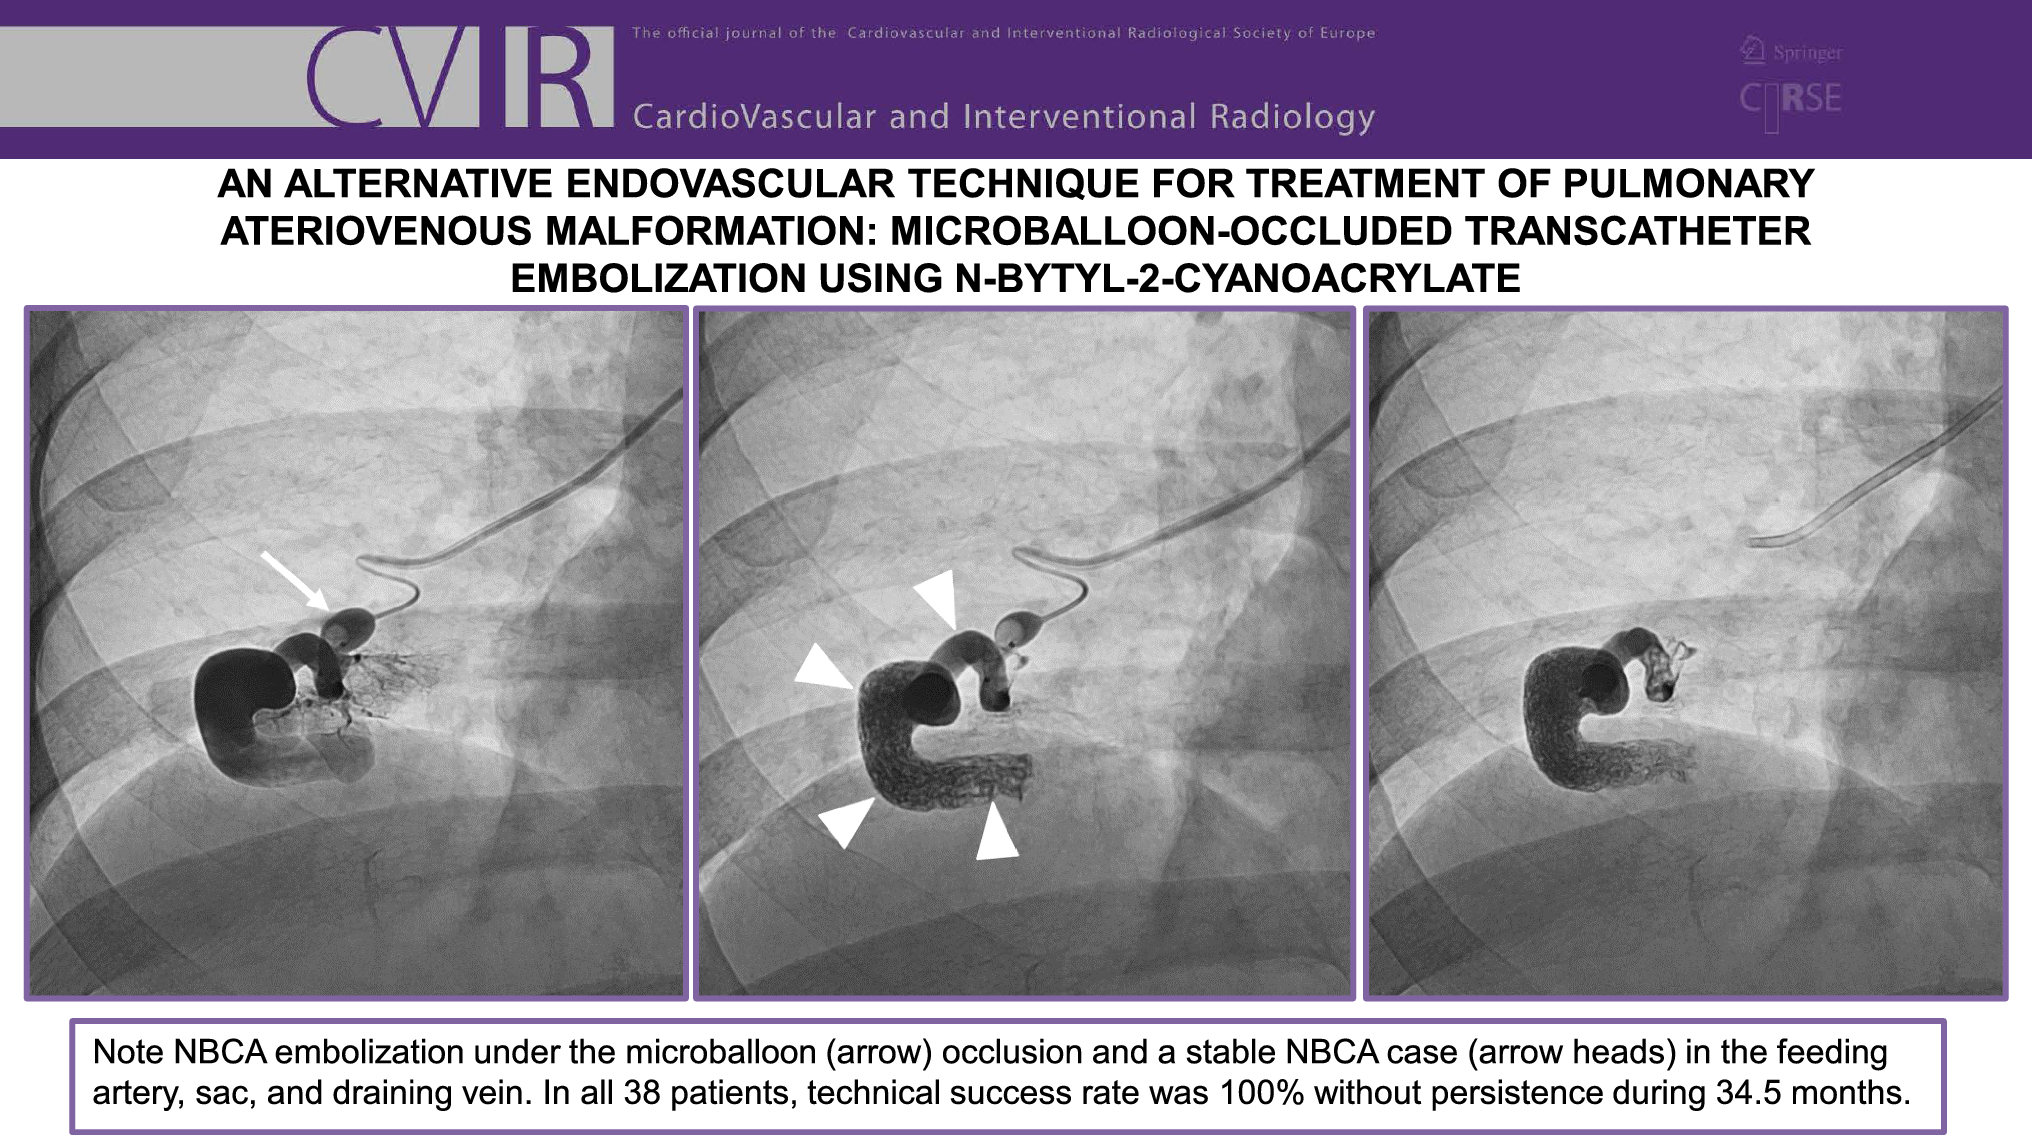 An Alternative Endovascular Technique for Treatment of Pulmonary Arteriovenous Malformation: Microballoon-occluded Transcatheter Embolization Using n-butyl-2-cyanoacrylate